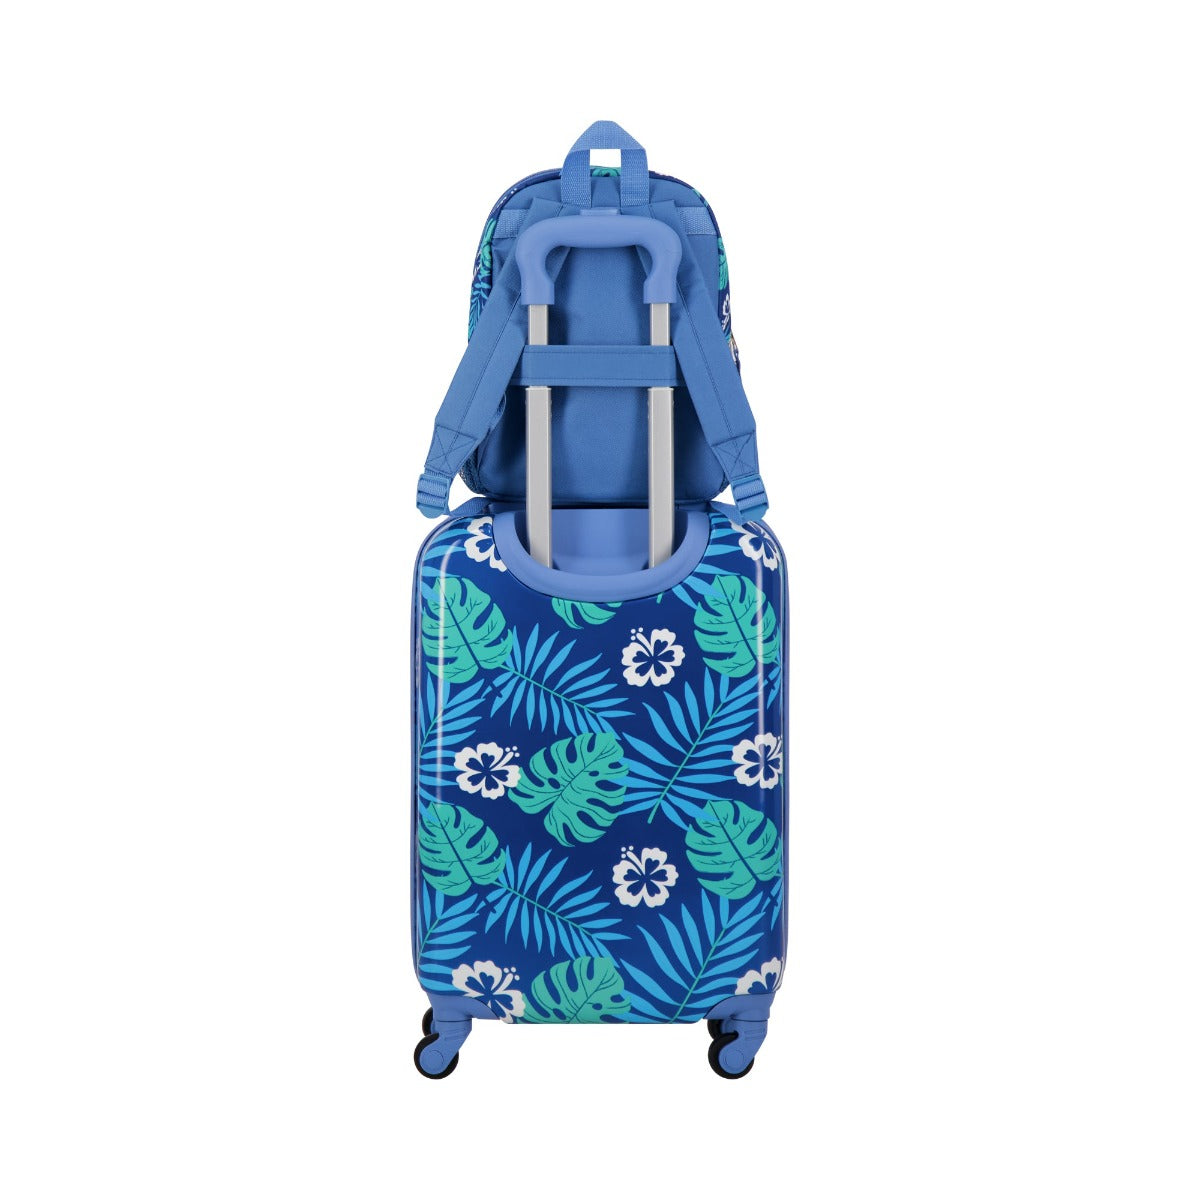 Blue Disney Ful Stitch tropical leaves 2 piece carry-on luggage and backpack set for kids